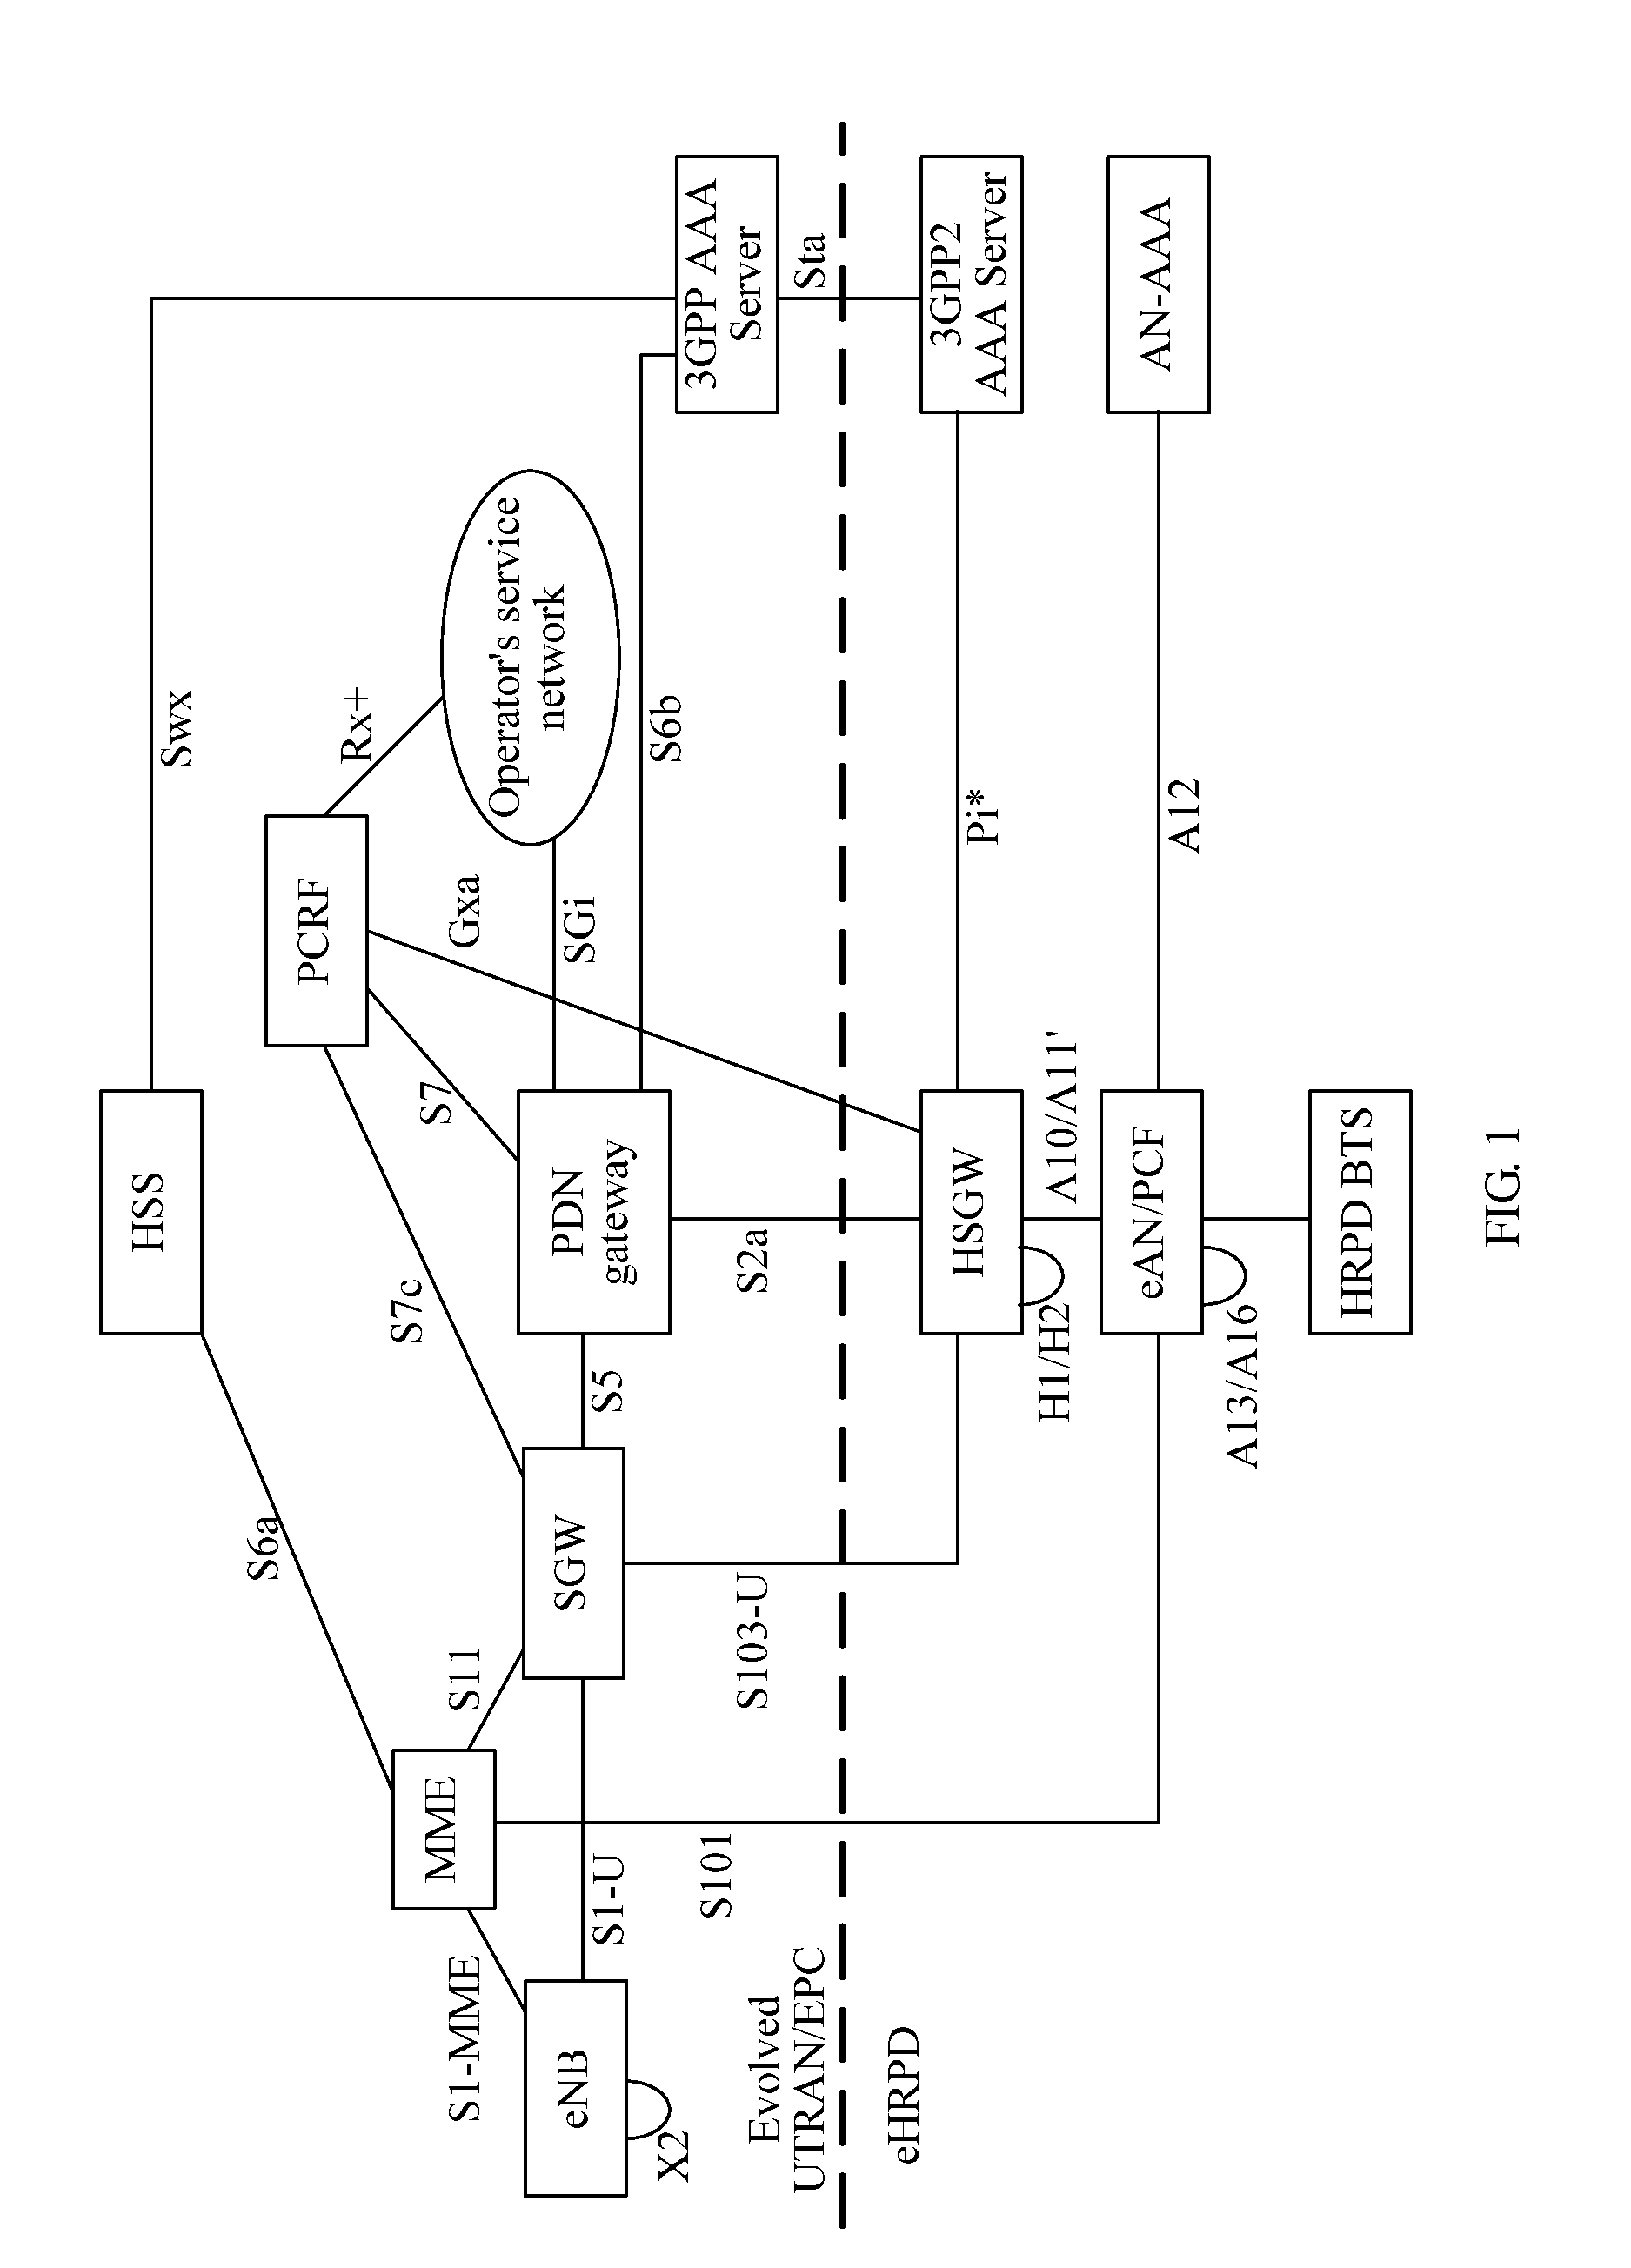 Method and Apparatus for Negotiation Control of Quality of Service Parameters